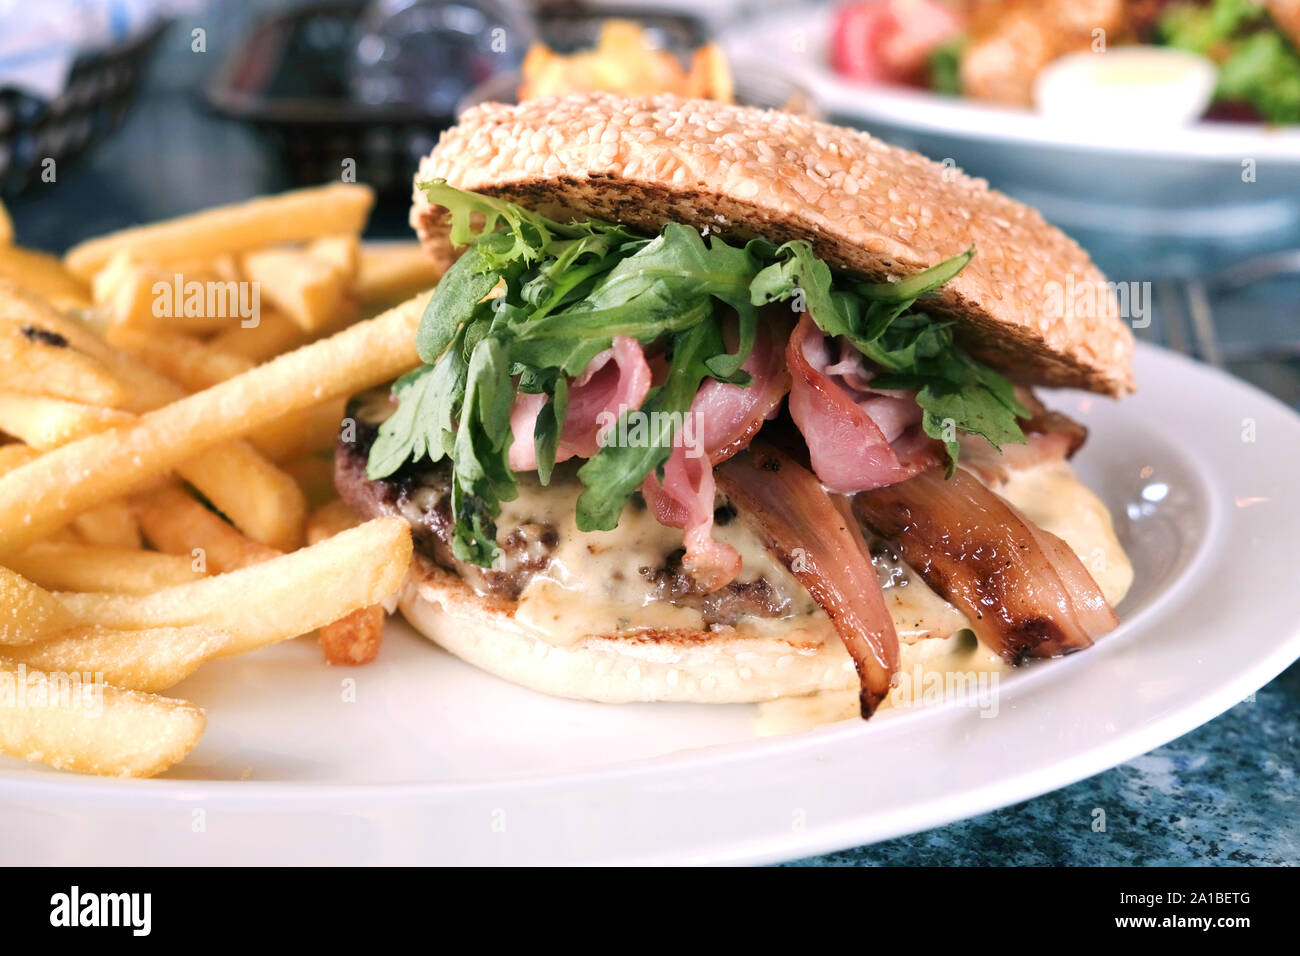 A tasty looking gourmet beefburger and french fries or chips served up on a restaurant table. It has green leaf and a grilled bacon topping Stock Photo